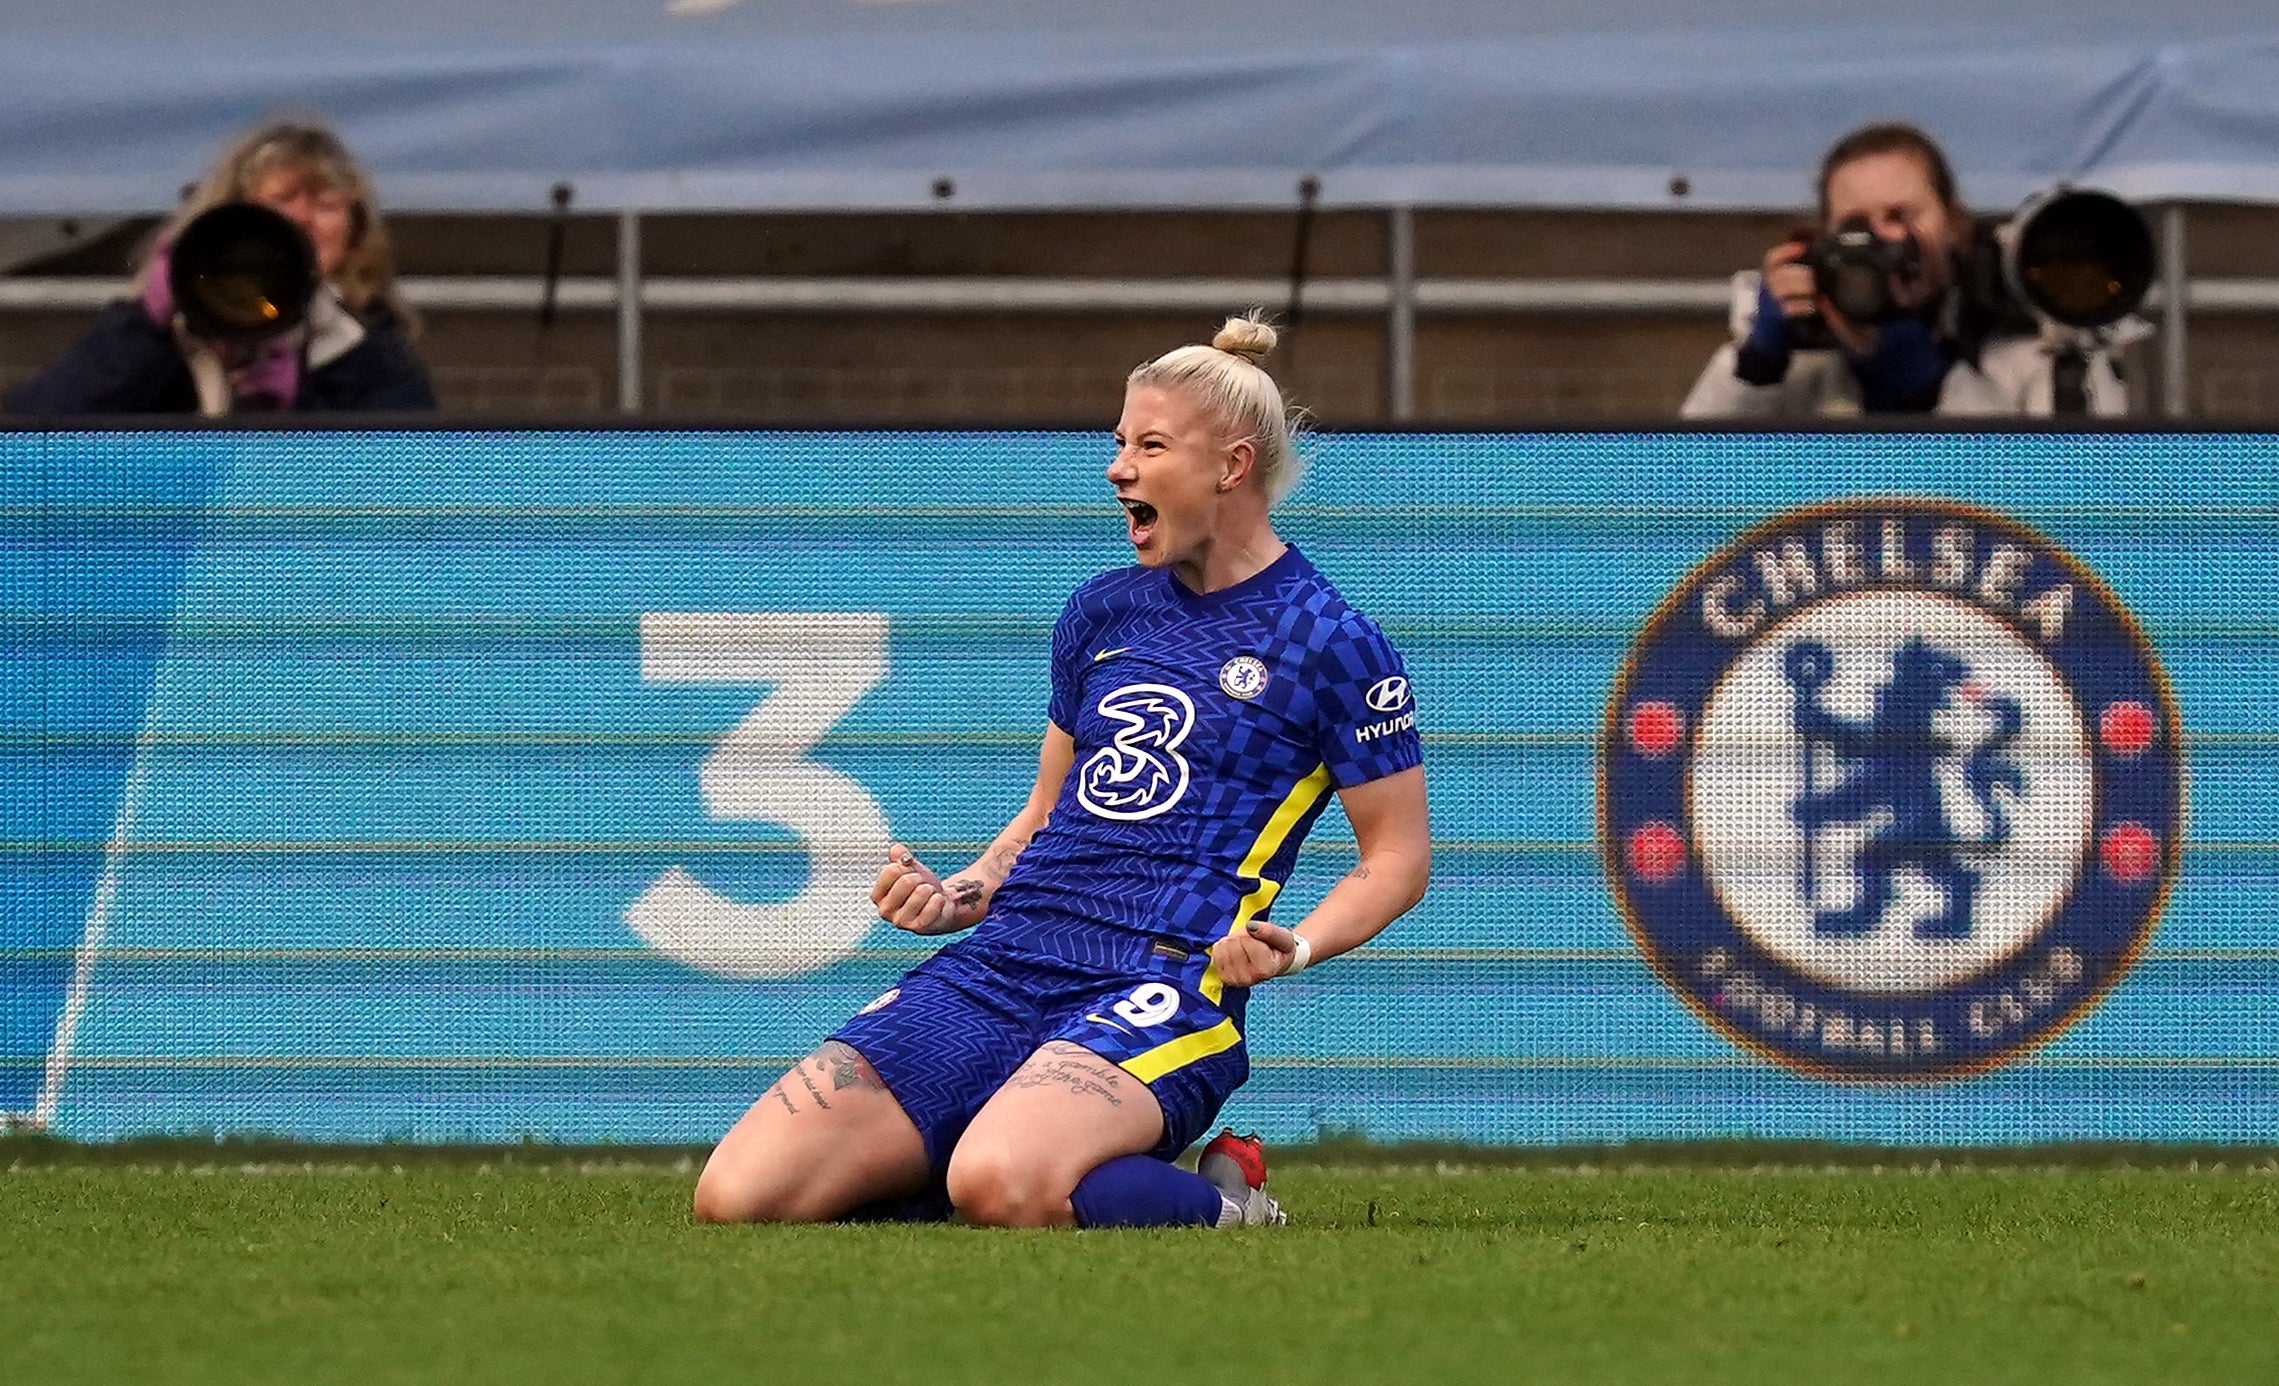 Chelsea’s Bethany England celebrates scoring her side’s third goal in a 3-0 victory in the FA Cup semi-final against Manchester City (Martin Rickett/PA)